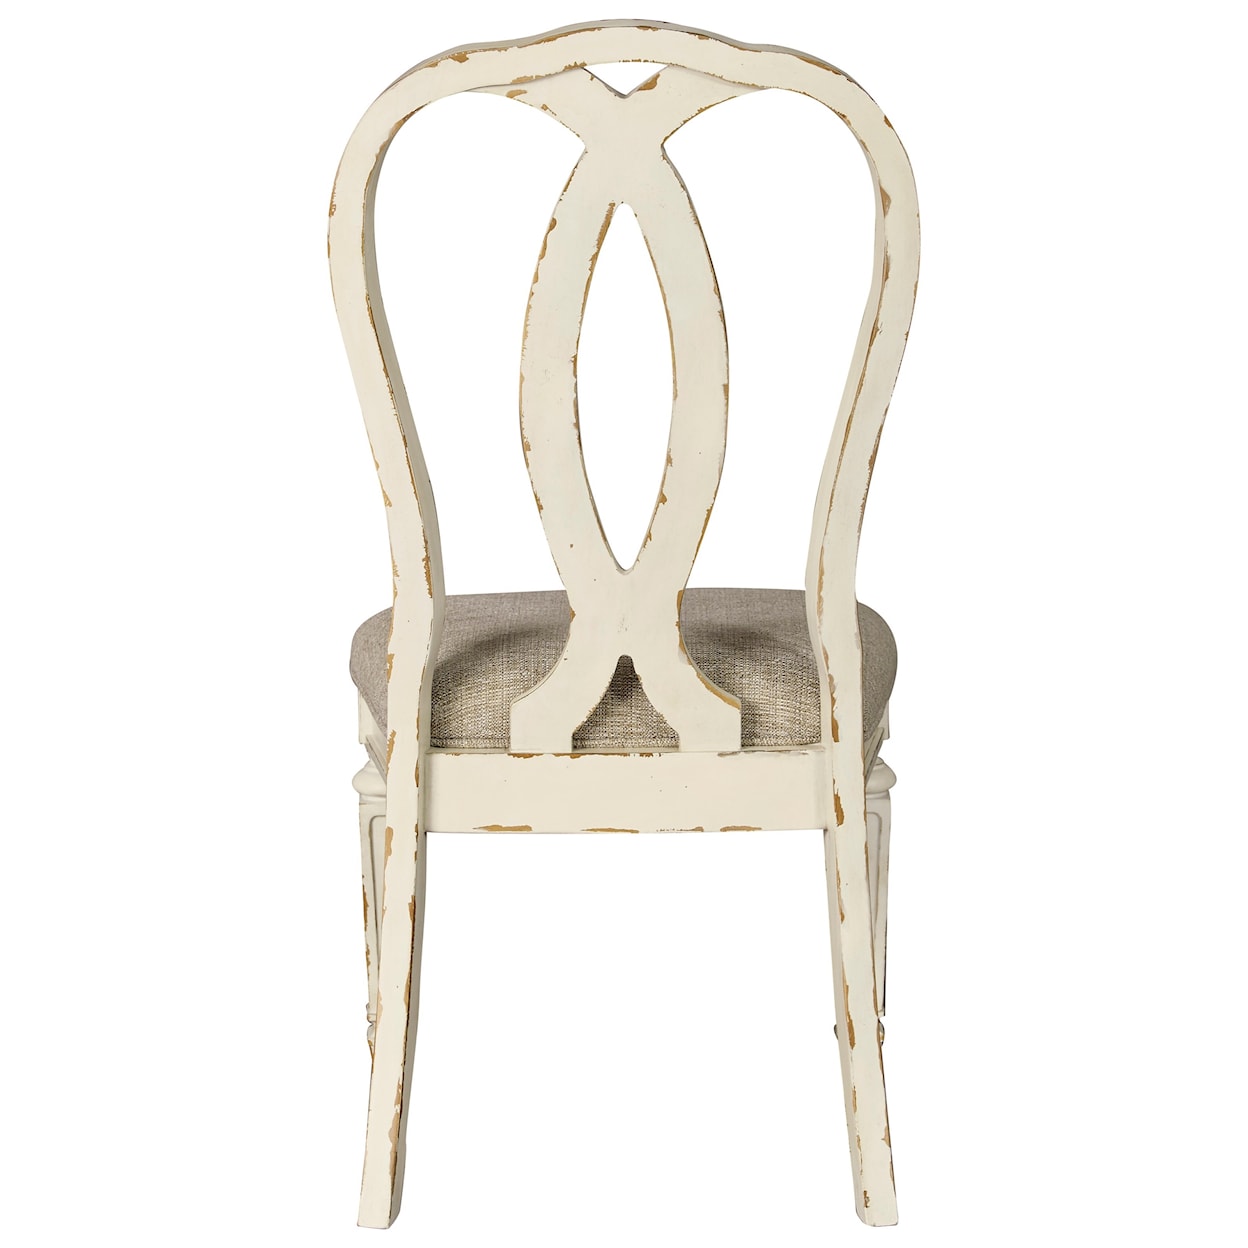 Signature Design by Ashley Furniture Realyn Dining Upholstered Side Chair